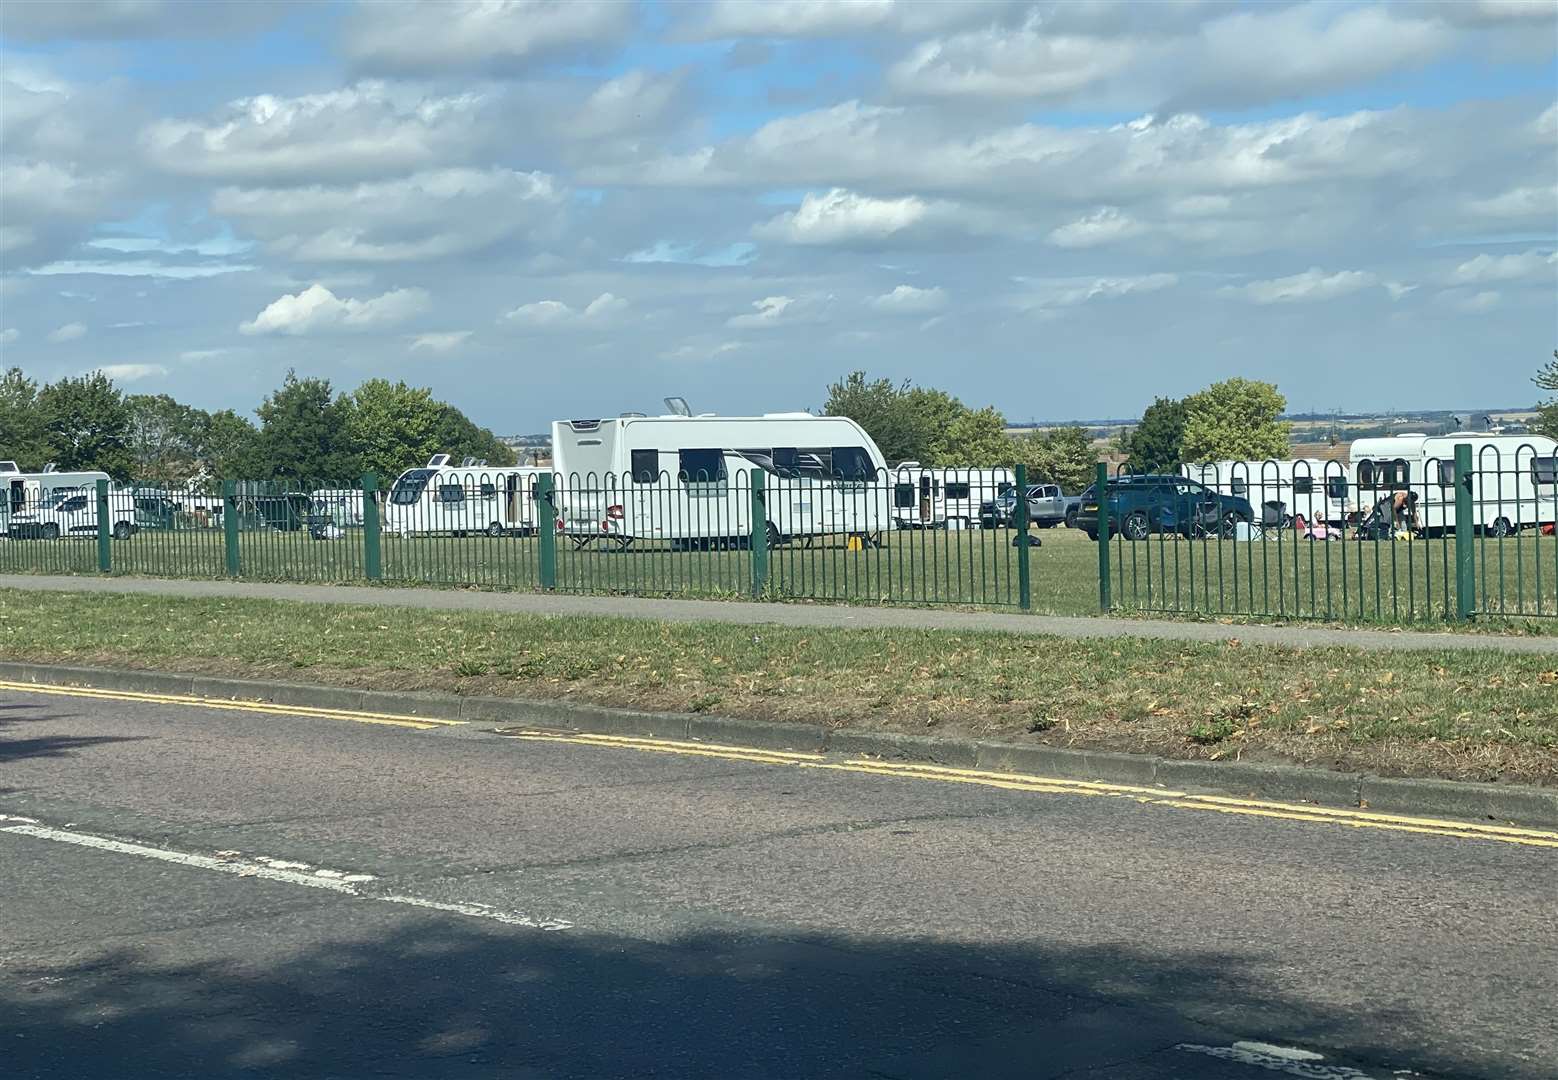 Travellers have repeatedly set up camp in Beechings Way, Twydall, over recent years